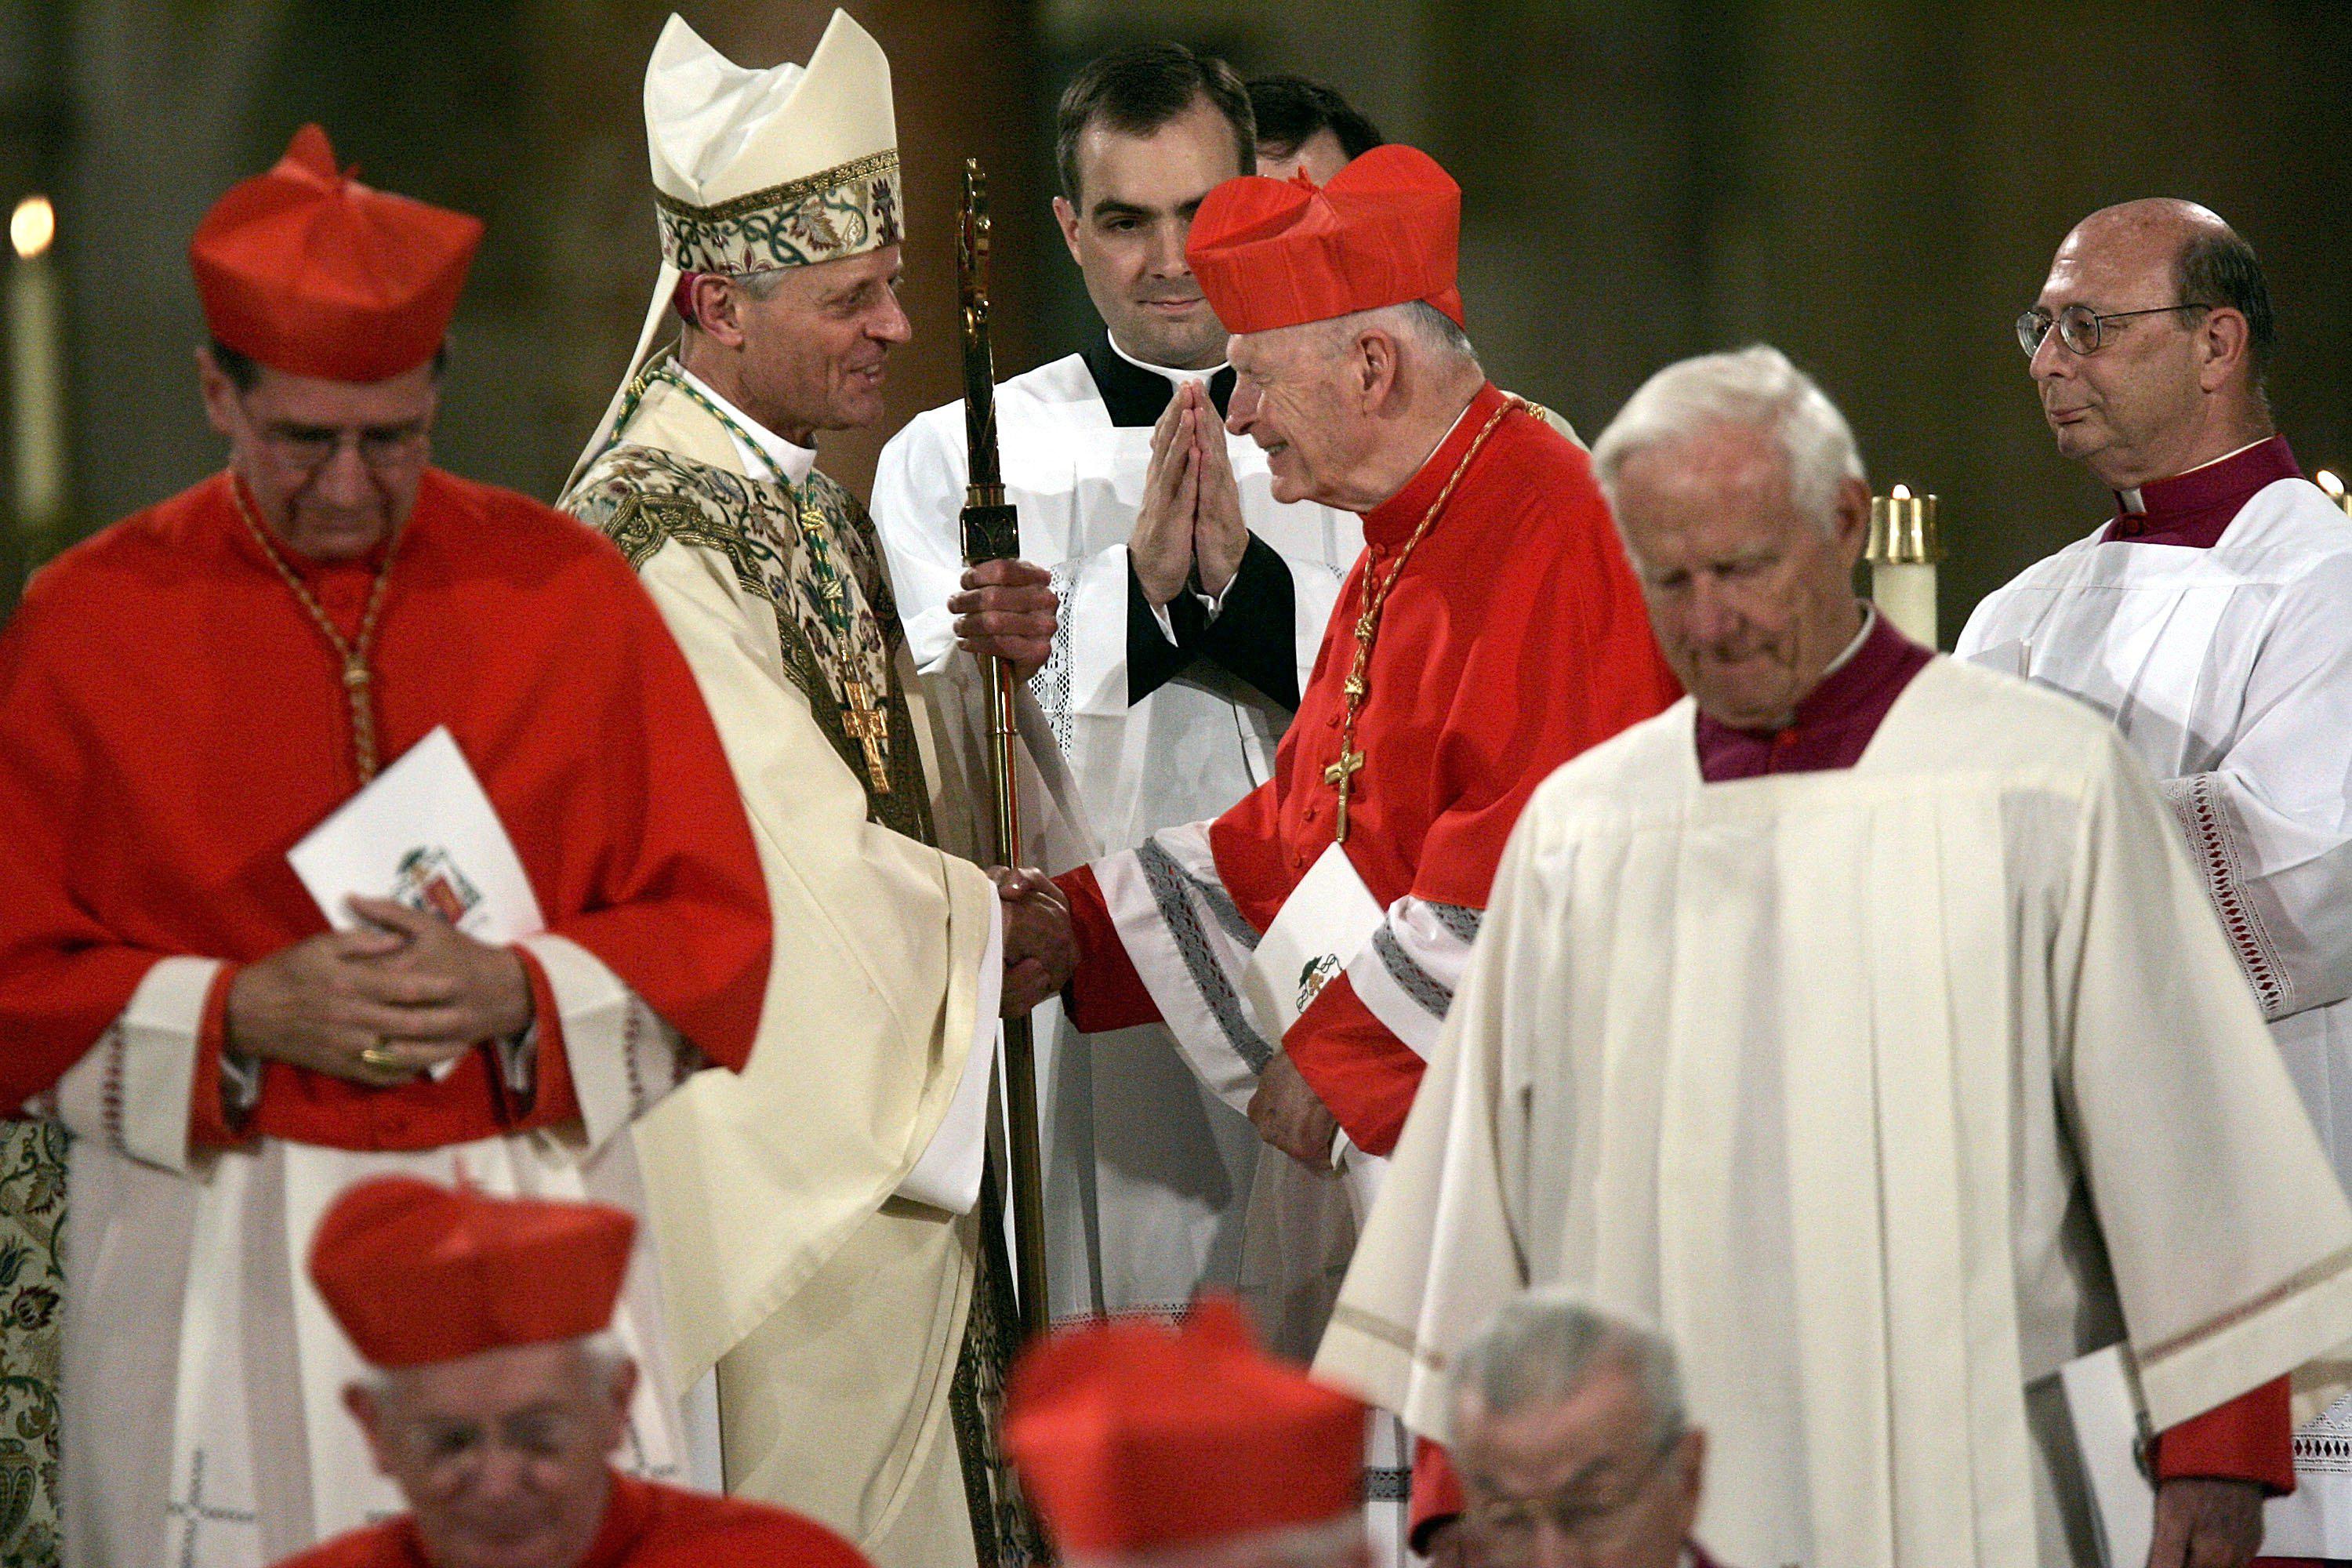 Donald W. Wuerl shakes hands with disgraced Cardinal Theodore E. McCarrick (R) in the interior of a cathedral, surrounded by other members of the clergy.